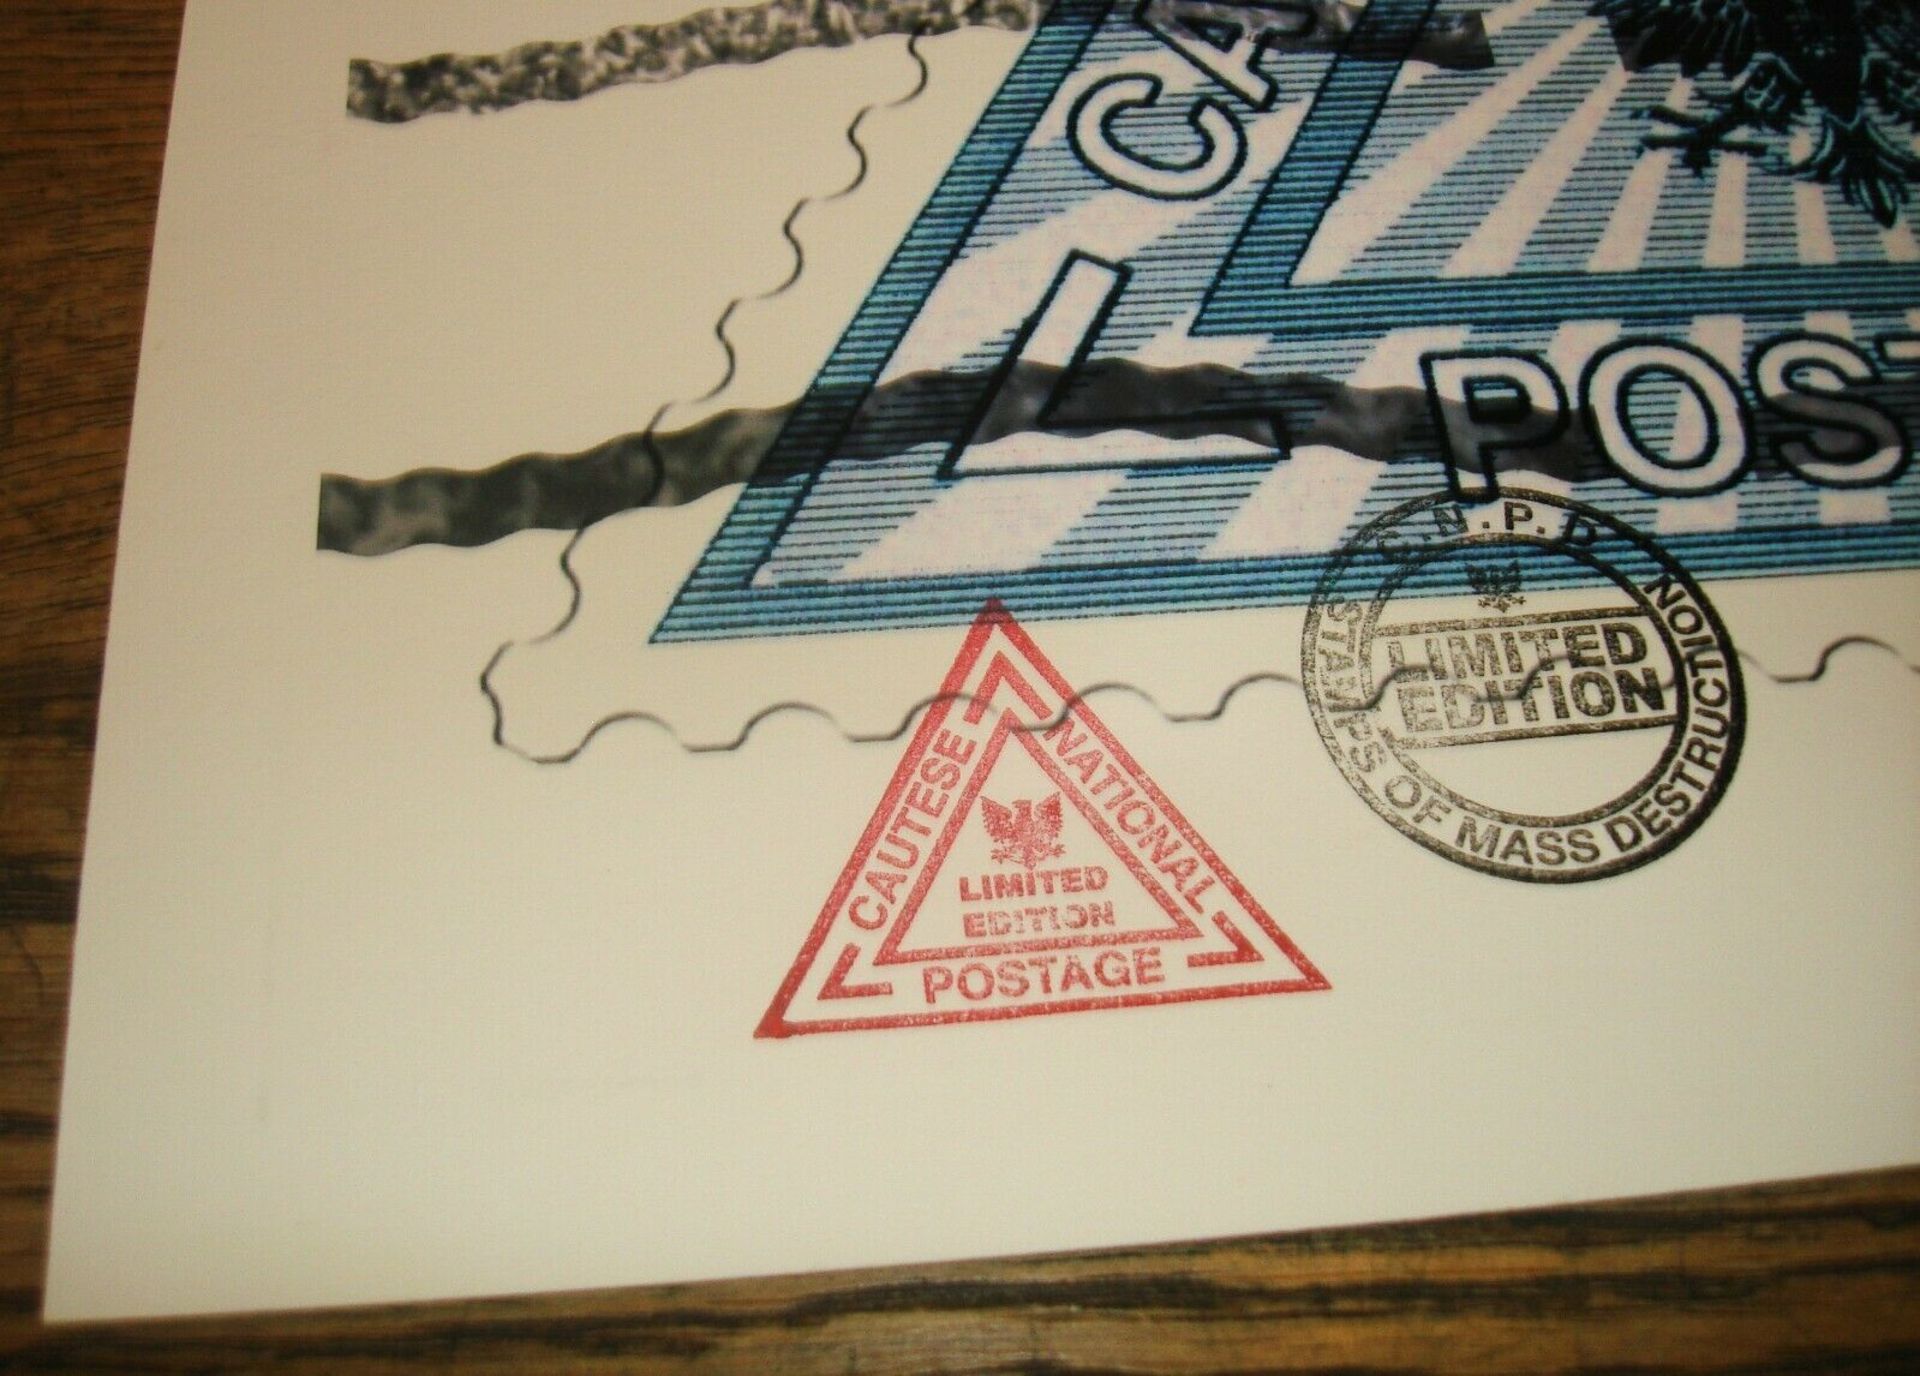 James Cauty (1956 - ) CNPD £2, £3 and £4 Triangle Stamps - Set of 3 Pop Editions COA (2005) - Image 6 of 13